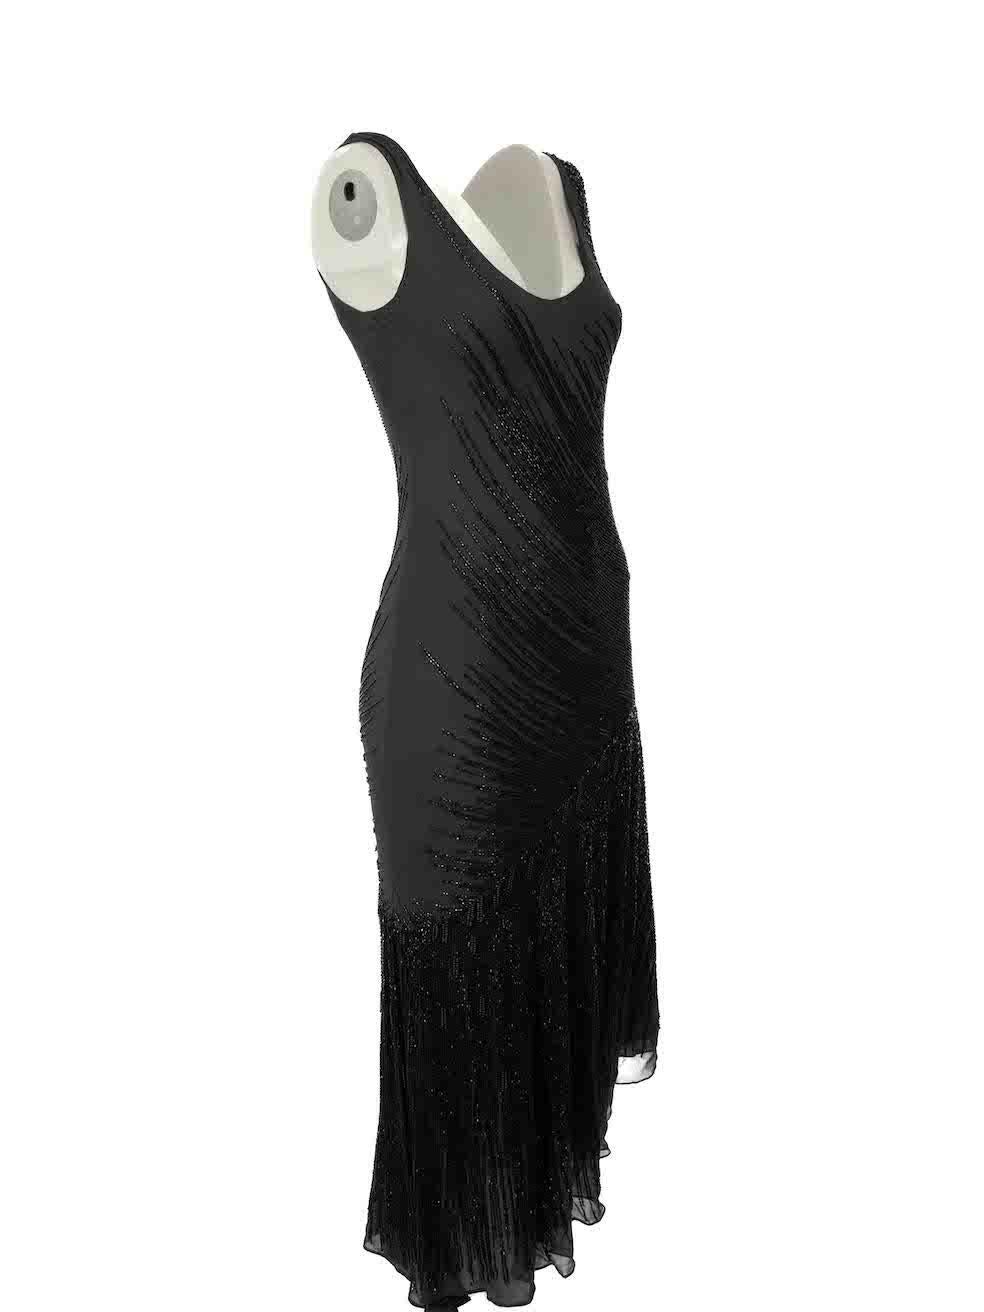 CONDITION is Very good. Minimal wear to dress is evident. Minimal wear to front right seam where some missing sequins on this used Amanda Wakeley designer resale item.

Details
Black
Silk
Dress
Beaded embellishment
Sleeveless
Round neck
Maxi

Made